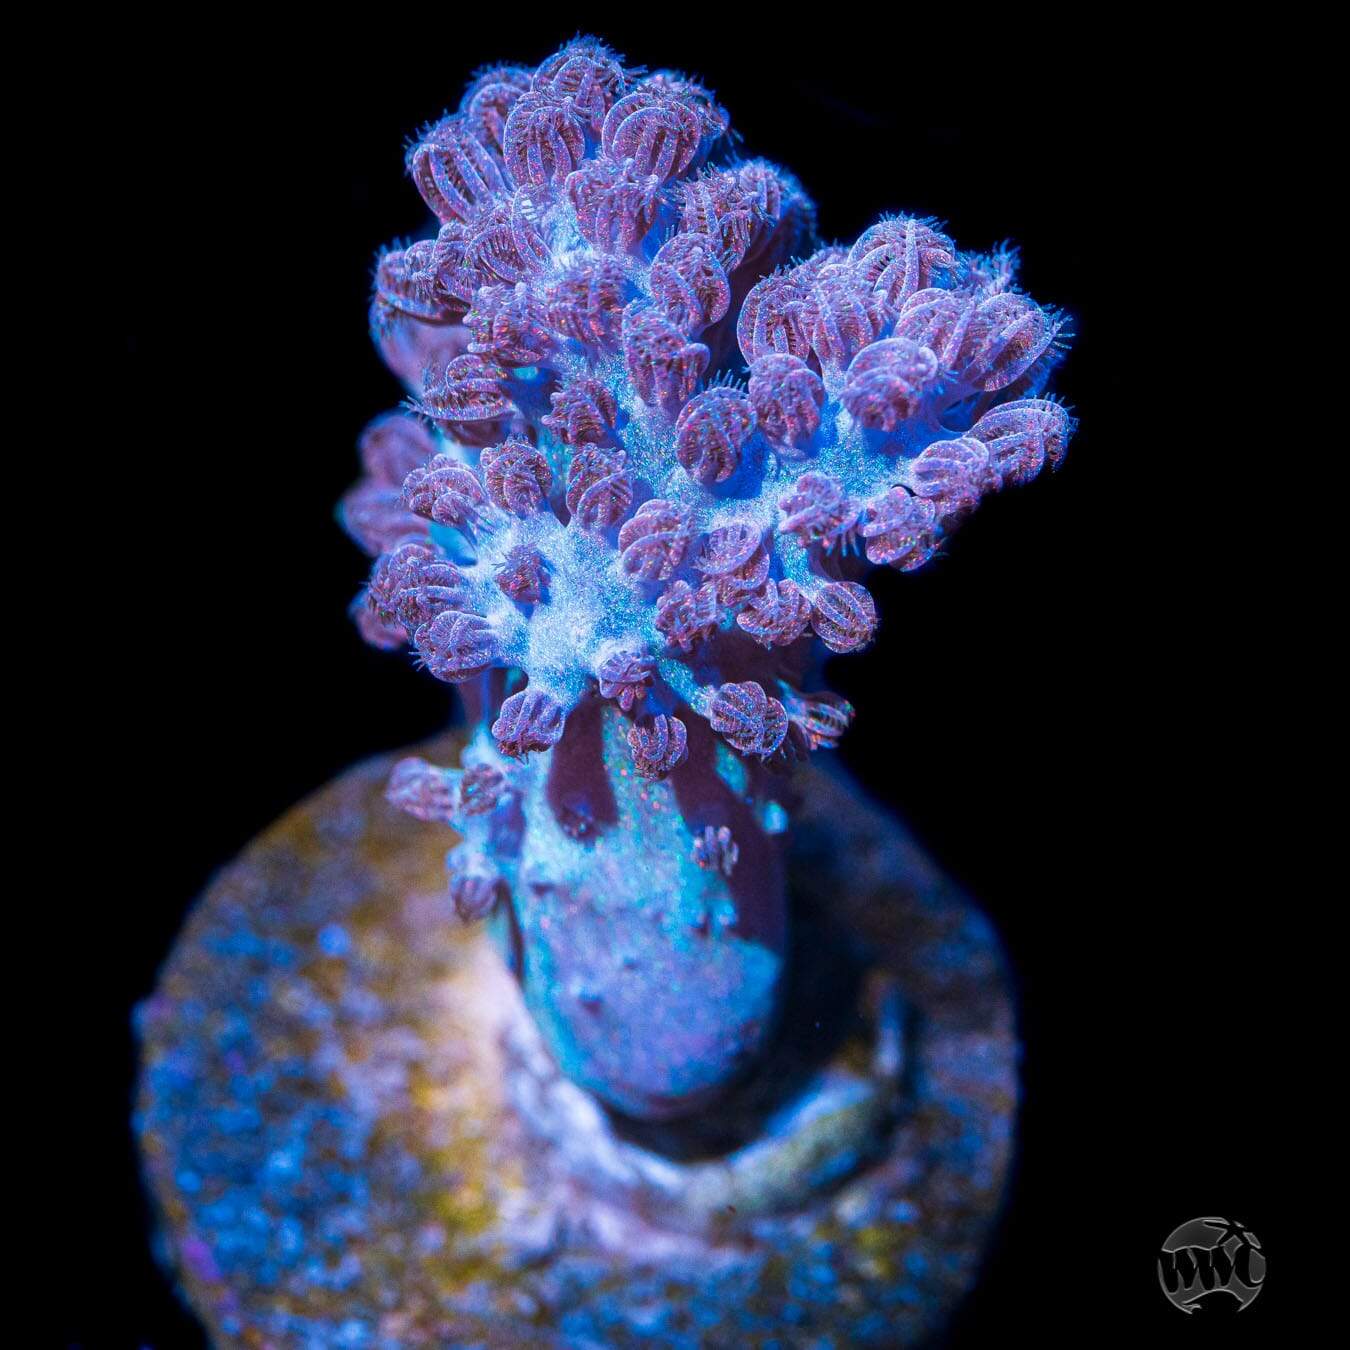 WWC Rainbow Sprinkles Cespitularia Coral